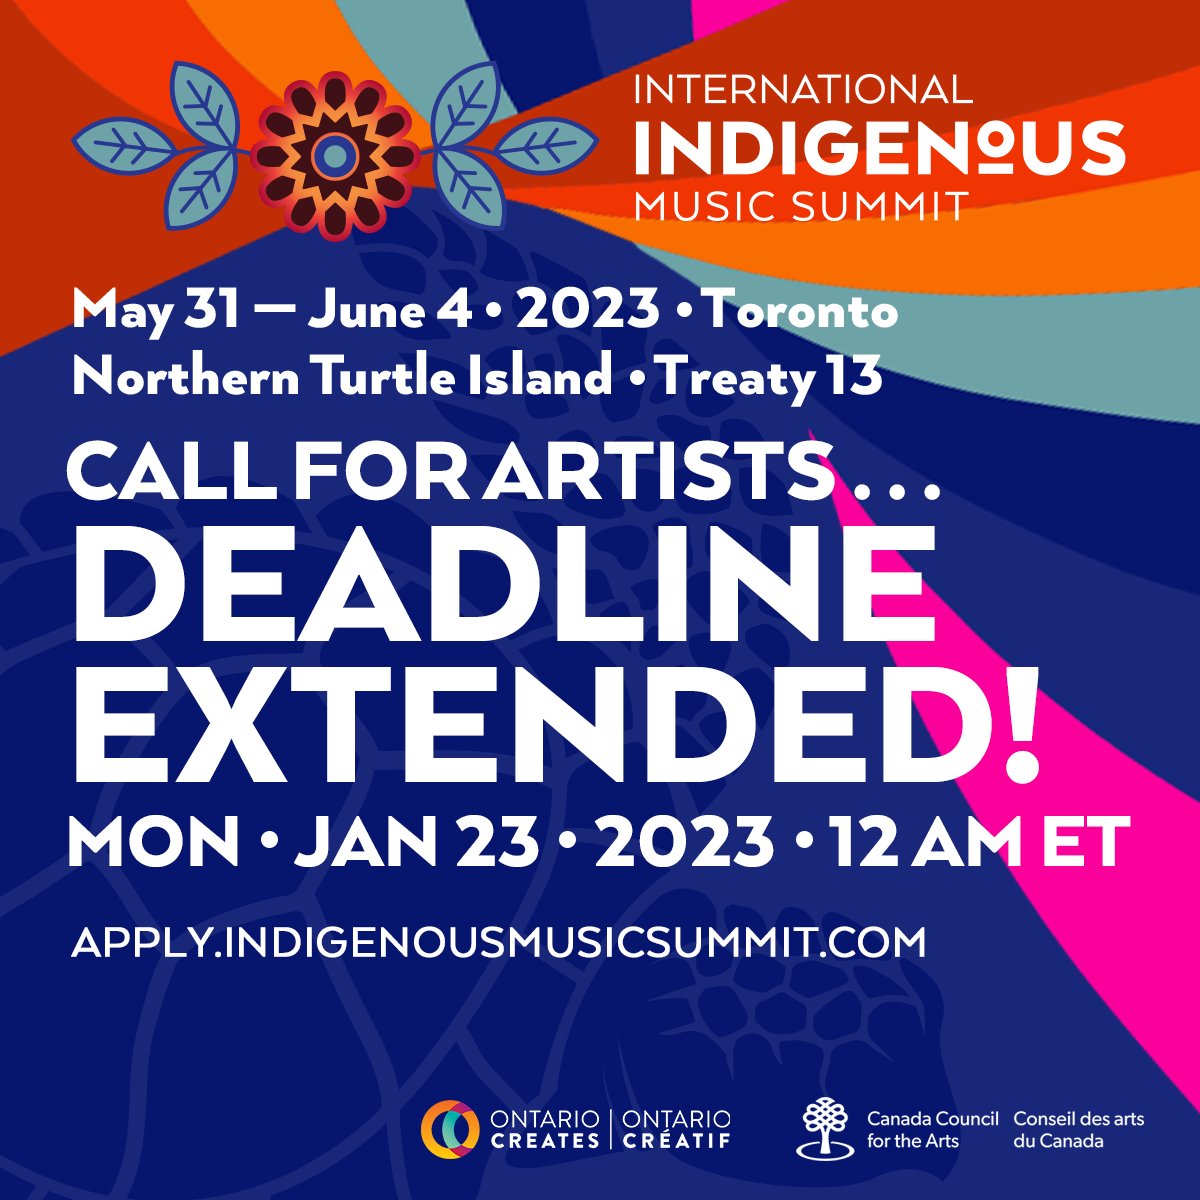 🔥 Good news! 🎤🎶 As everyone gets caught up after the holidays, we're extending the deadline for artist showcase applications to Mon., Jan. 23rd (2023), and submissions are open to all Indigenous artists across Turtle Island and around the globe: apply.indigenousmusicsummit.com